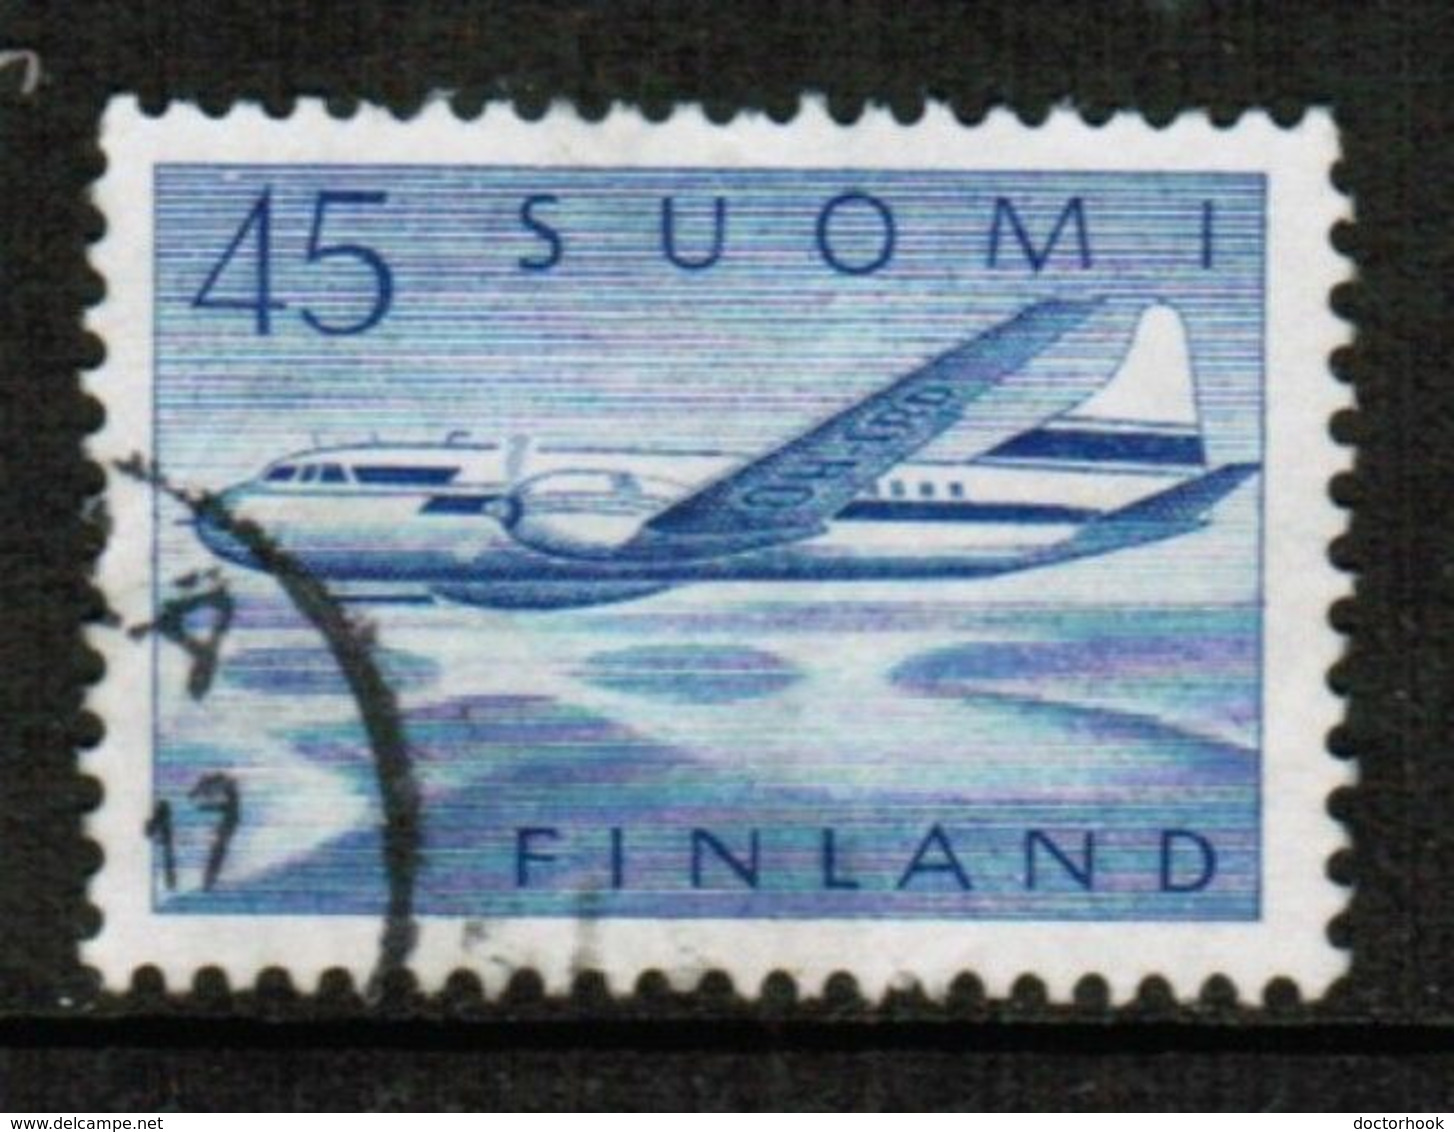 FINLAND  Scott # C 7 VF USED (Stamp Scan # 724) - Used Stamps